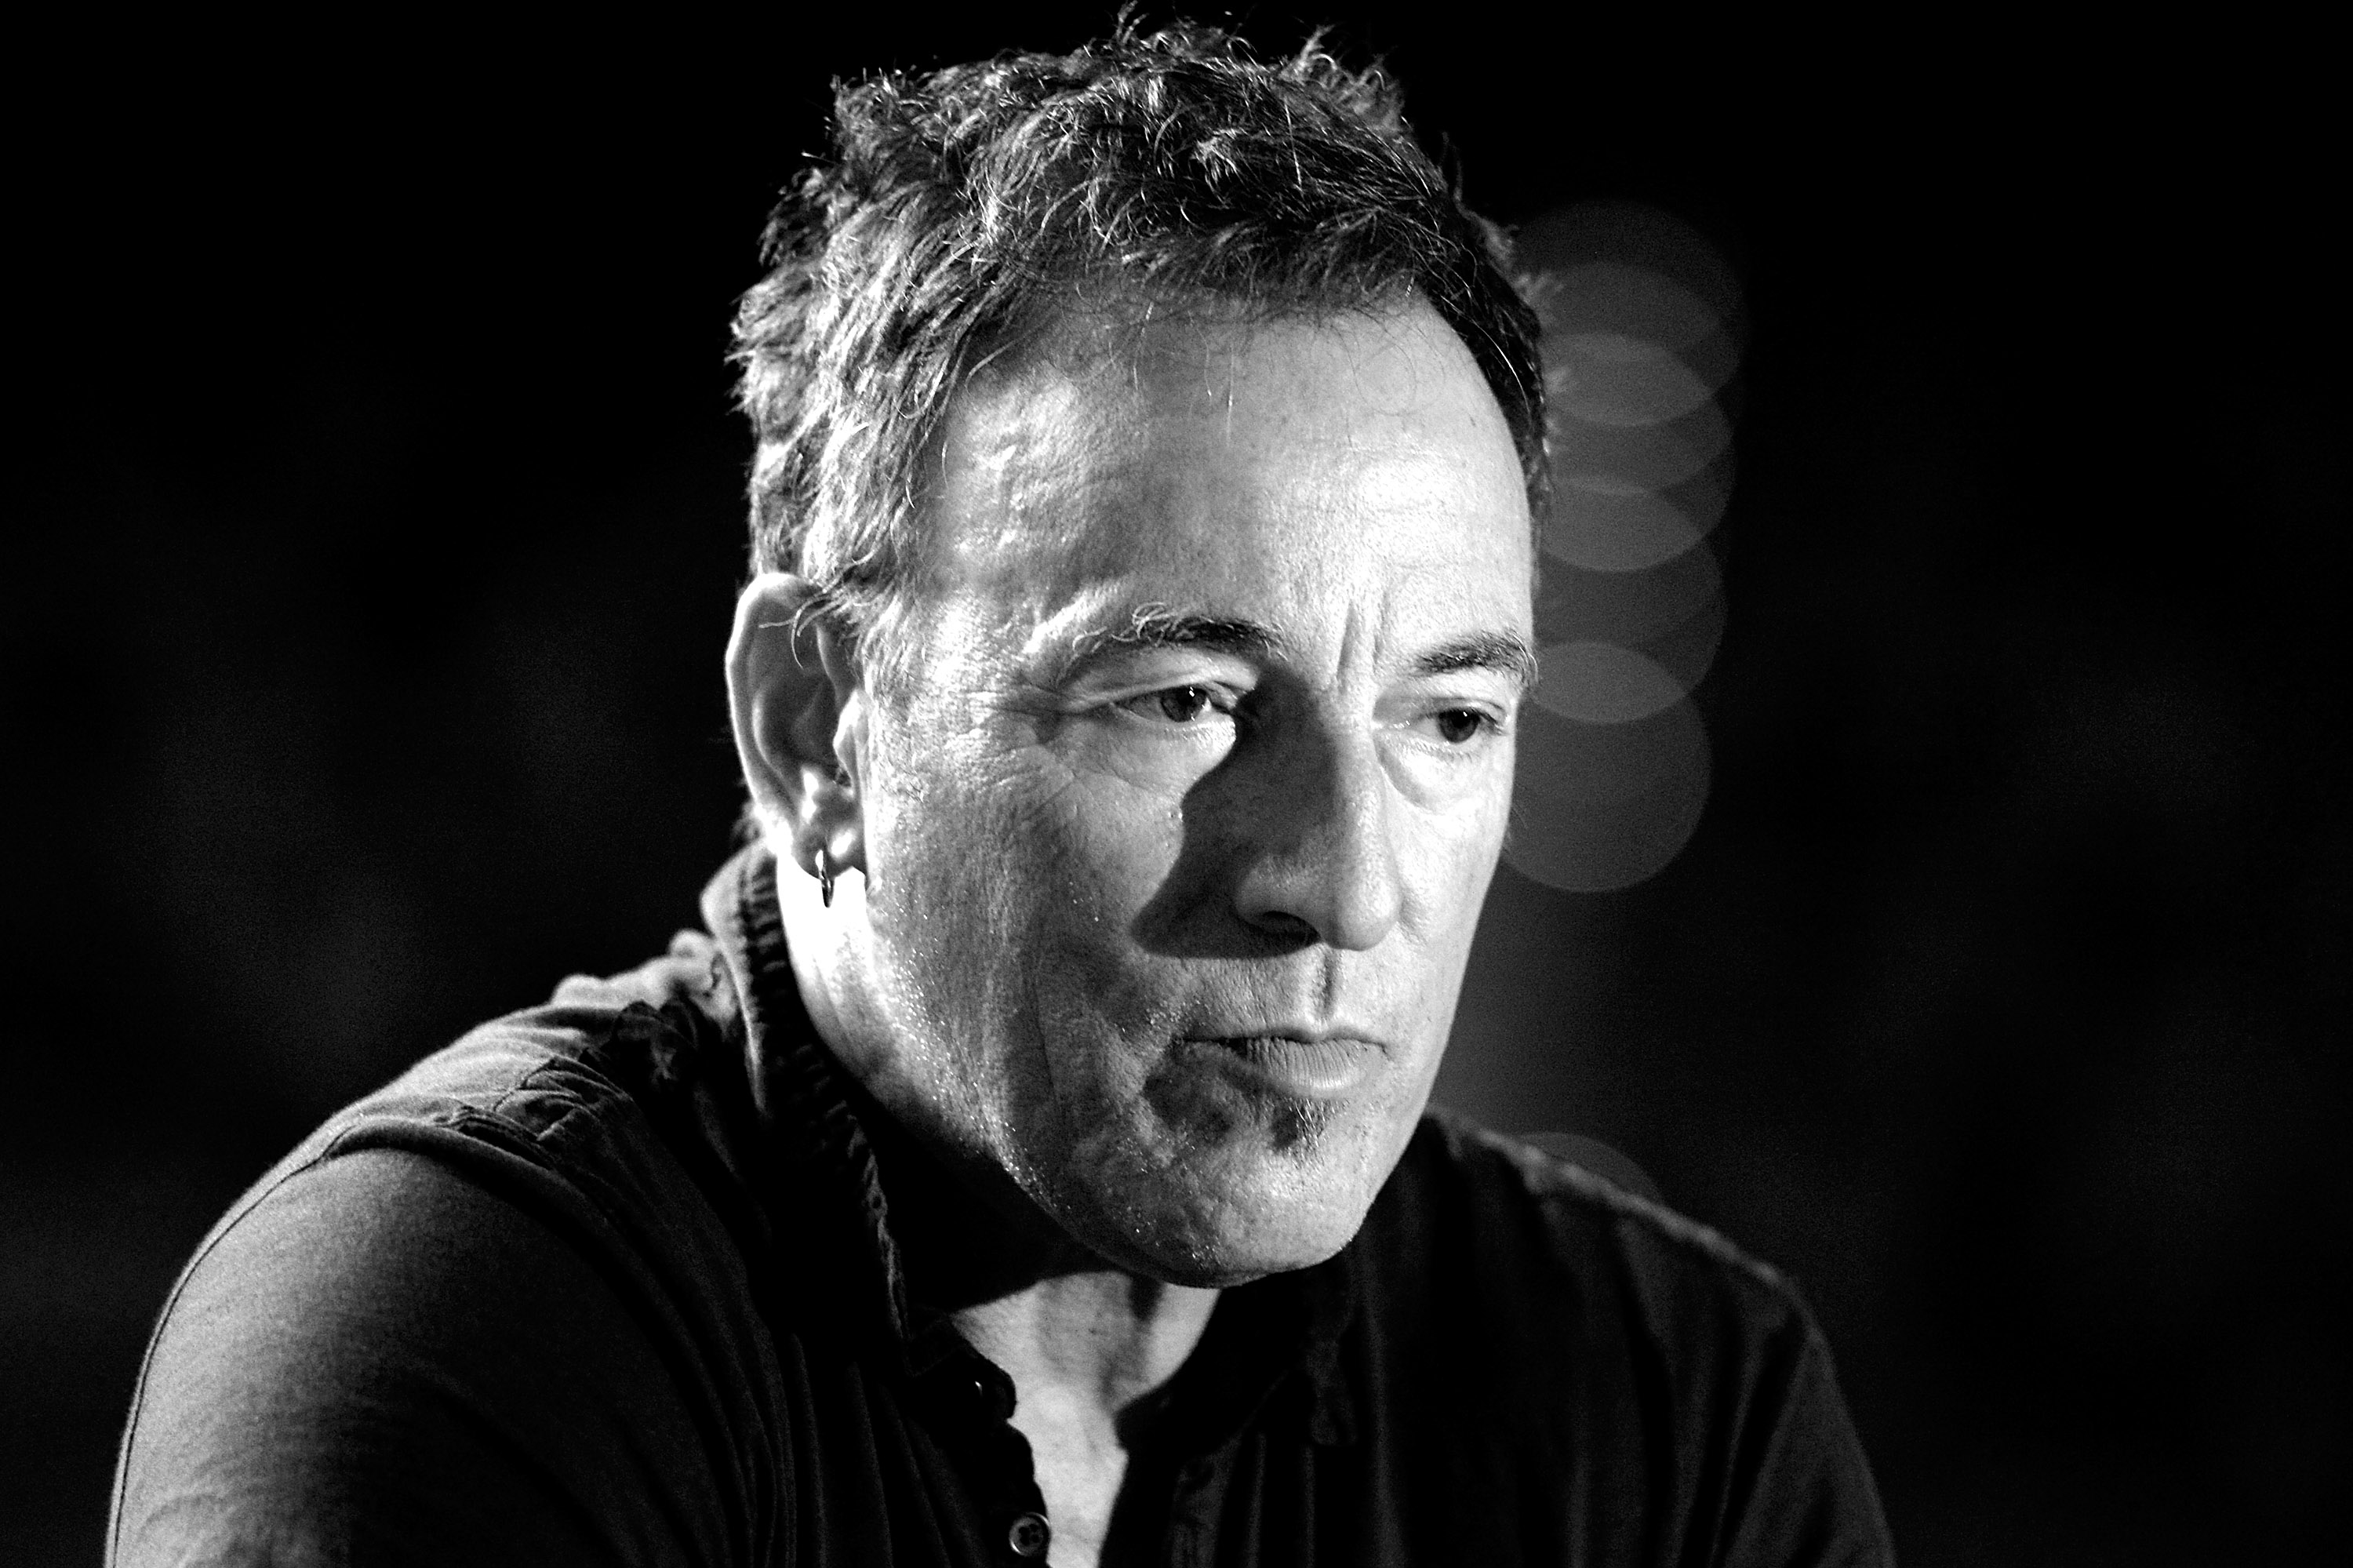 Bruce Springsteen in Brisbane, Australia on March 14, 2013. | Source: Getty Images